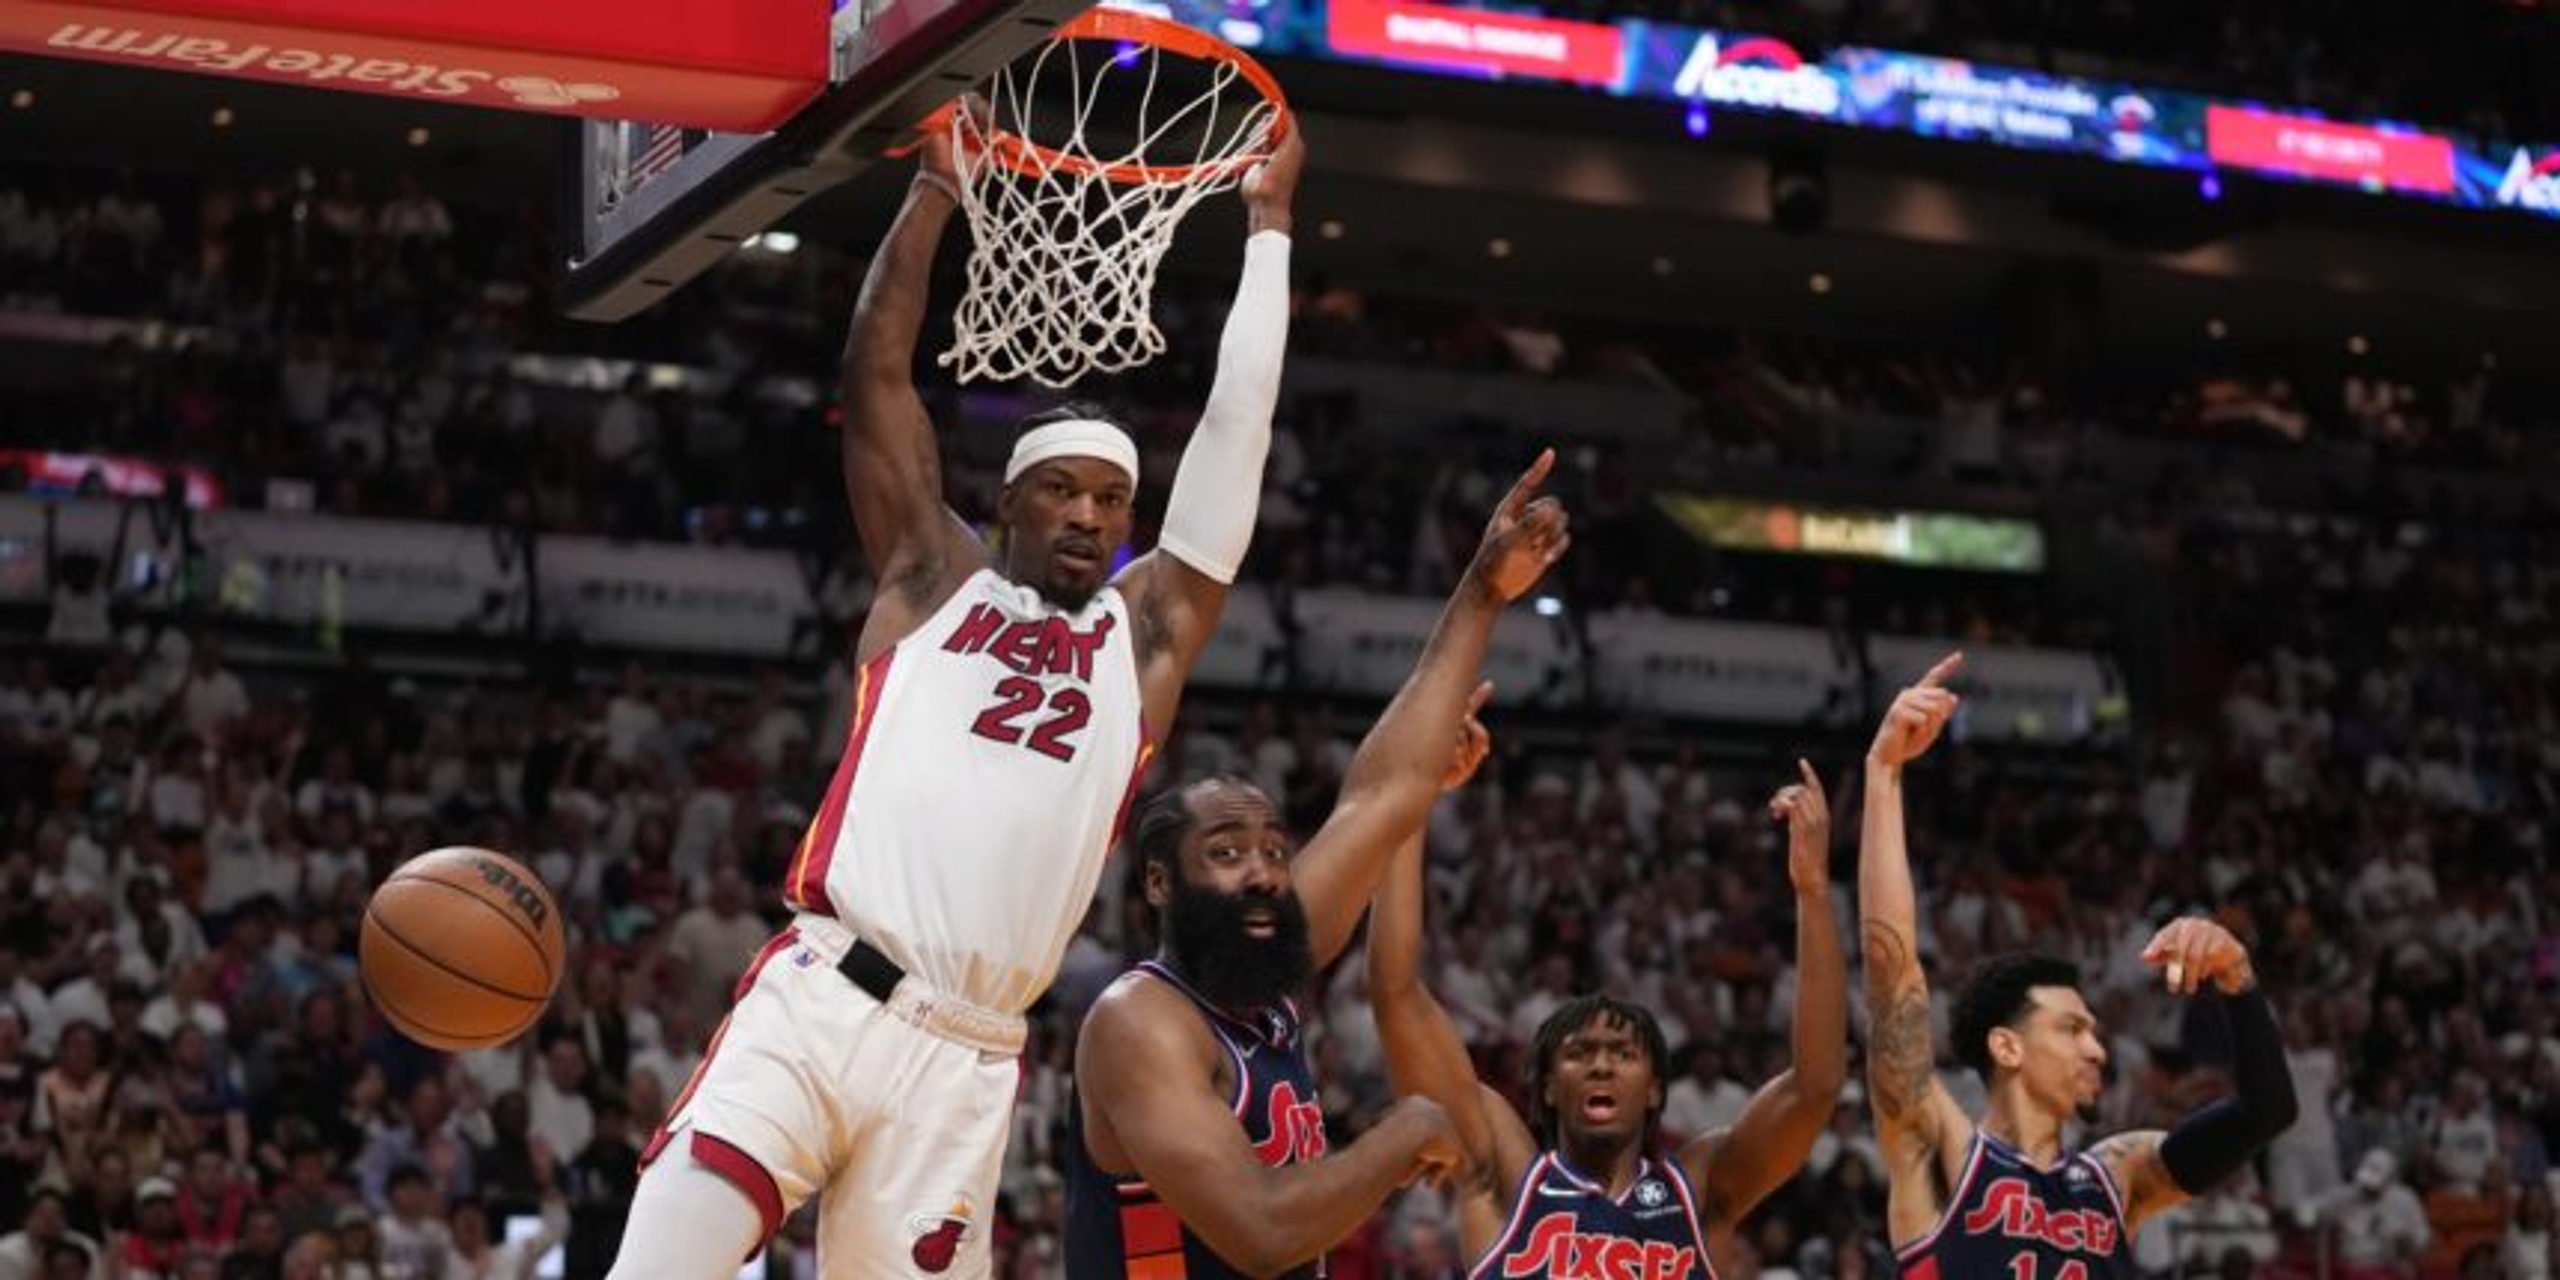 Heat roll past 76ers 120-85 in Game 5, take 3-2 series lead